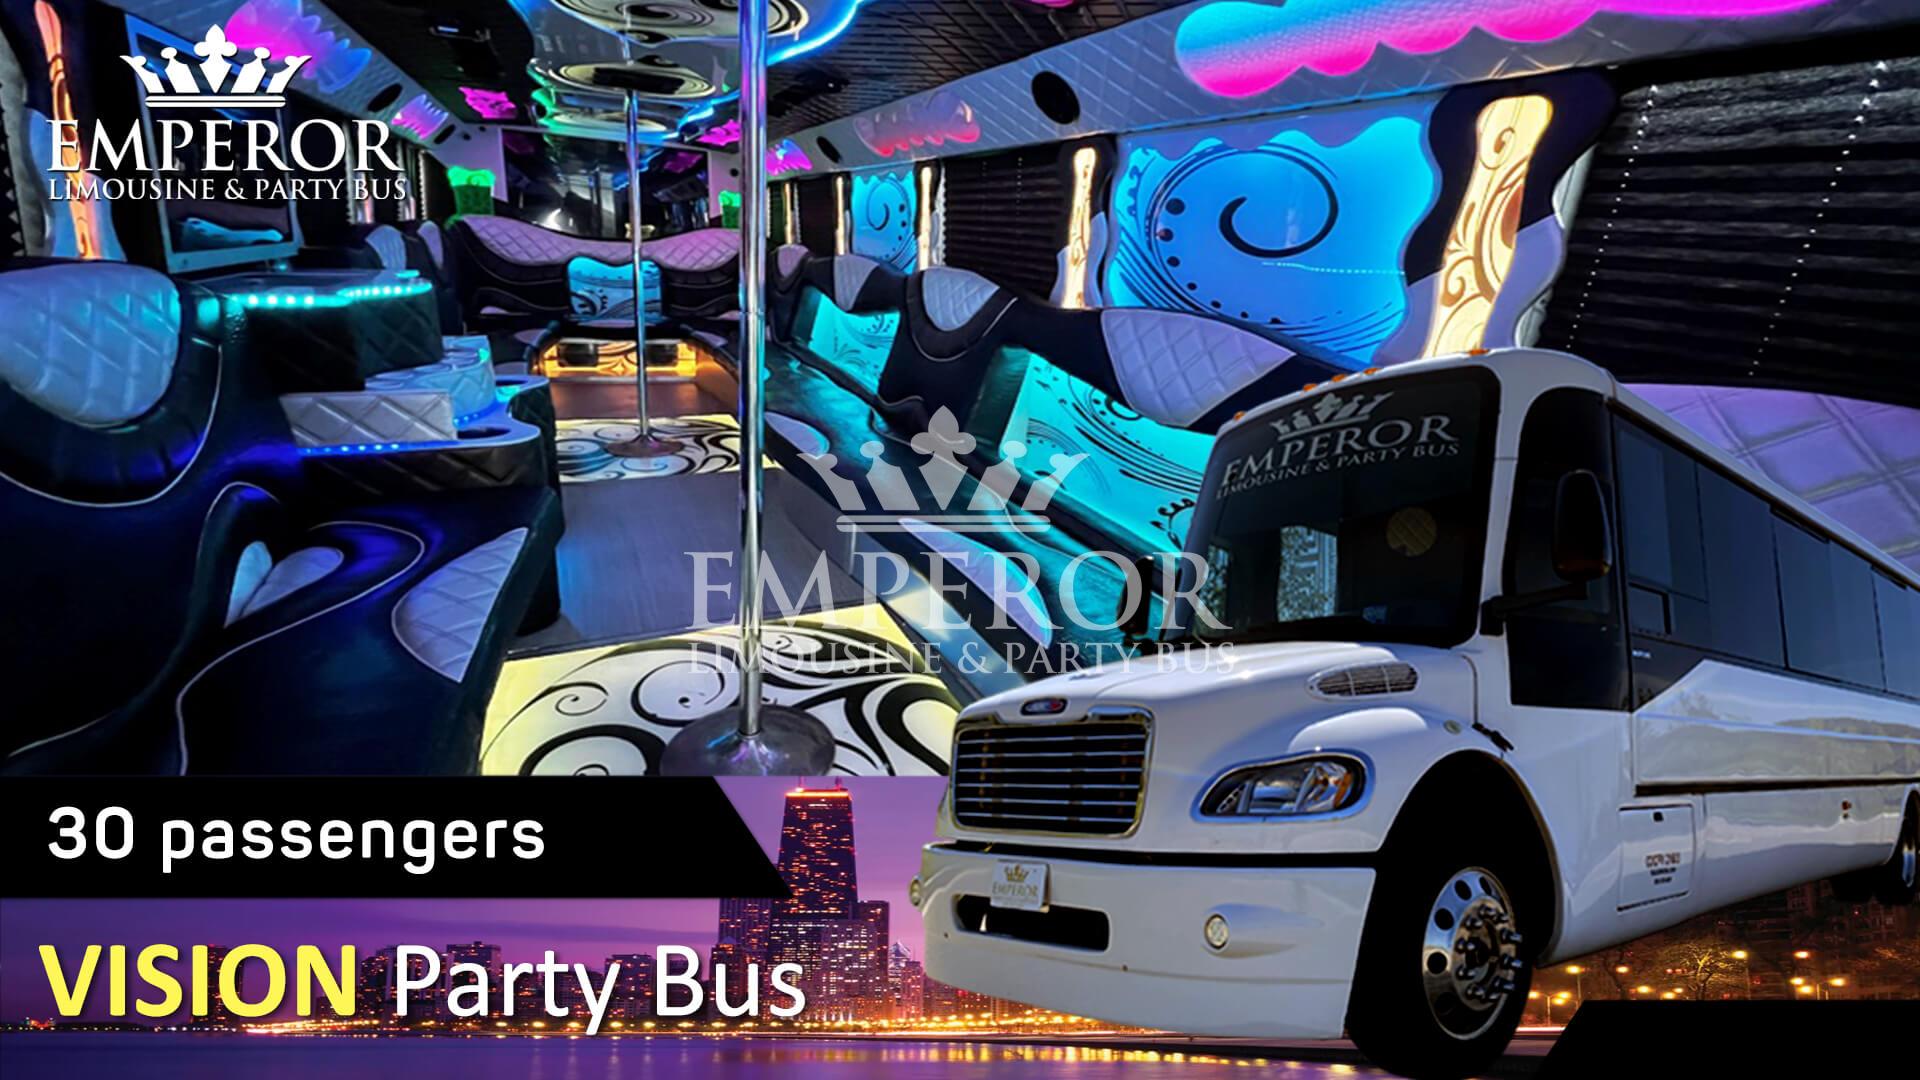 Corporate party bus rental service - Vision edition